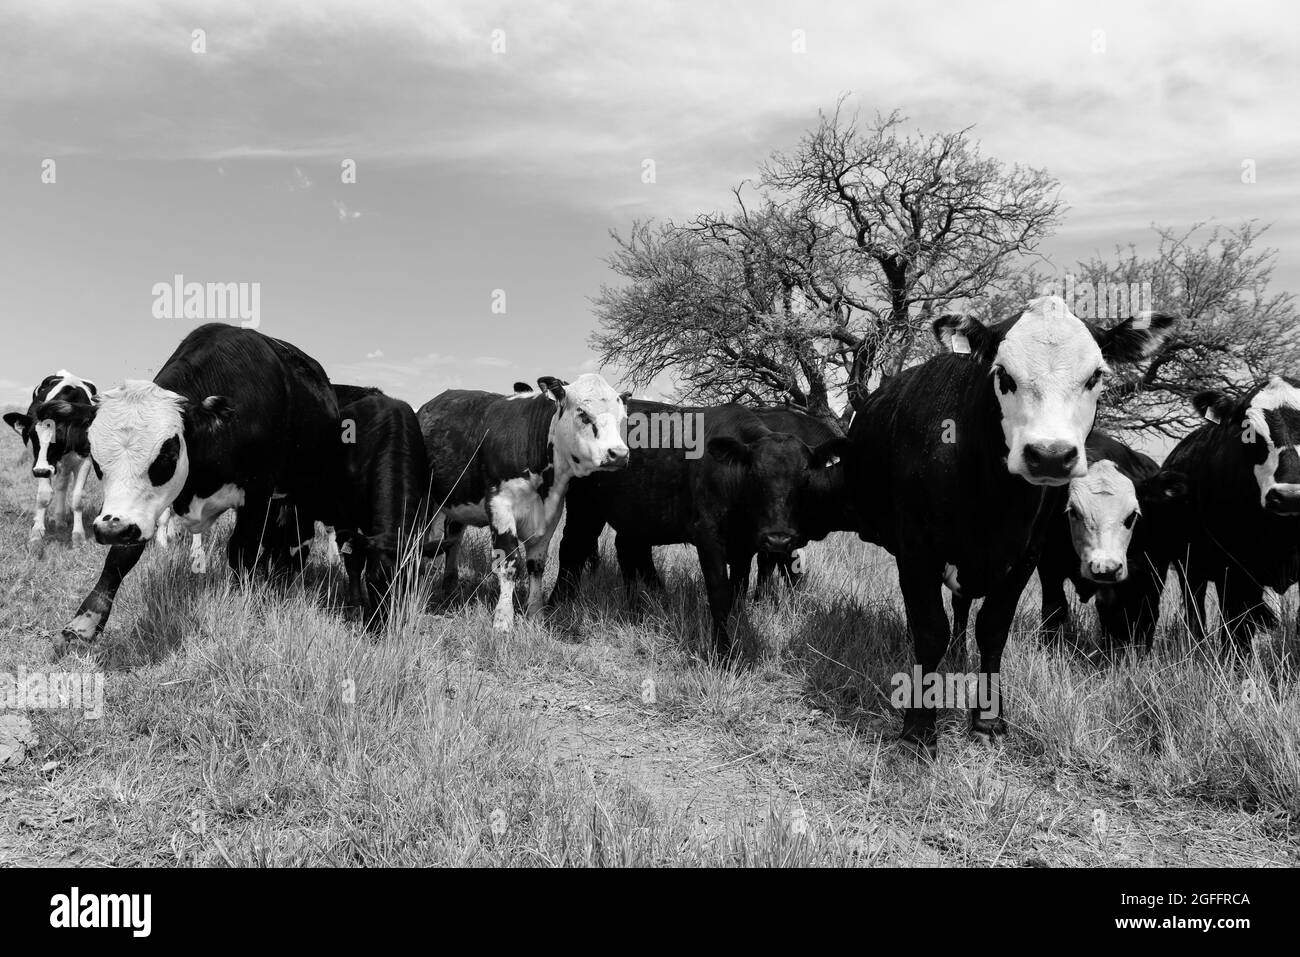 Cows raised with natural pastures, meat production in the Argentine countryside, La Pampa Province, Argentina. Stock Photo